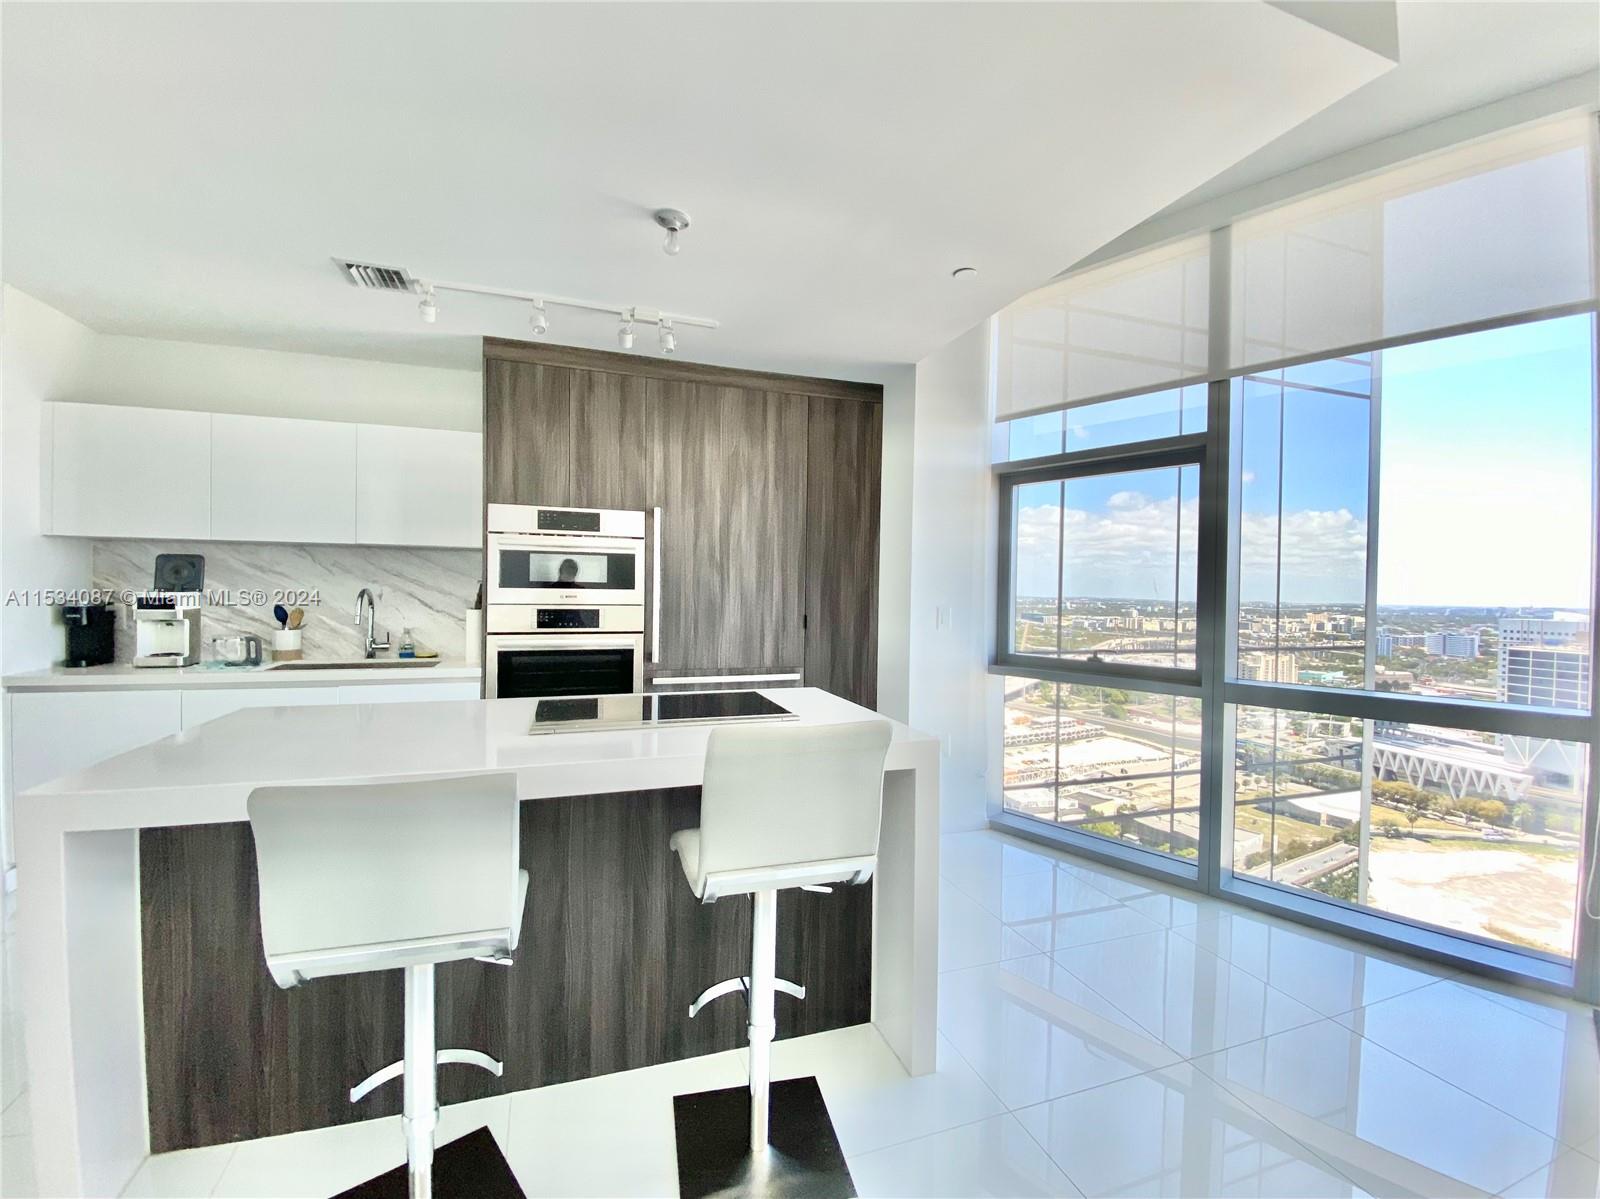 GREAT FOR INVESTORS!!!****Beautiful apartment with incredible view from 28th floor in Luxury PARAMOUNT MIAMI WORLDCENTER*** 1 bed + DEN (ADDITIONAL BEDROOM OR OFFICE) 1 full bath + 1 half bath, European kitchen, 10 ft ceilings, large balcony, floor to ceiling windows***This is one of the famous buildings in the Downtown Miami Area and is known for its 5-star amenities*** Resort-style pool, cabanas, social leisure lounges, wellness spa and salon, kids’ room, state of the art GYM with boxing ring, yoga studio, basketball court, tennis court, BBQ kitchen, virtual golf, recording studio, food market, 24-hour front desk & valet***Located in the heart of Downtown Miami, walking distance to Arena, Performing Art Center, Museums, Miami Dade college, Bayside shops, restaurants etc